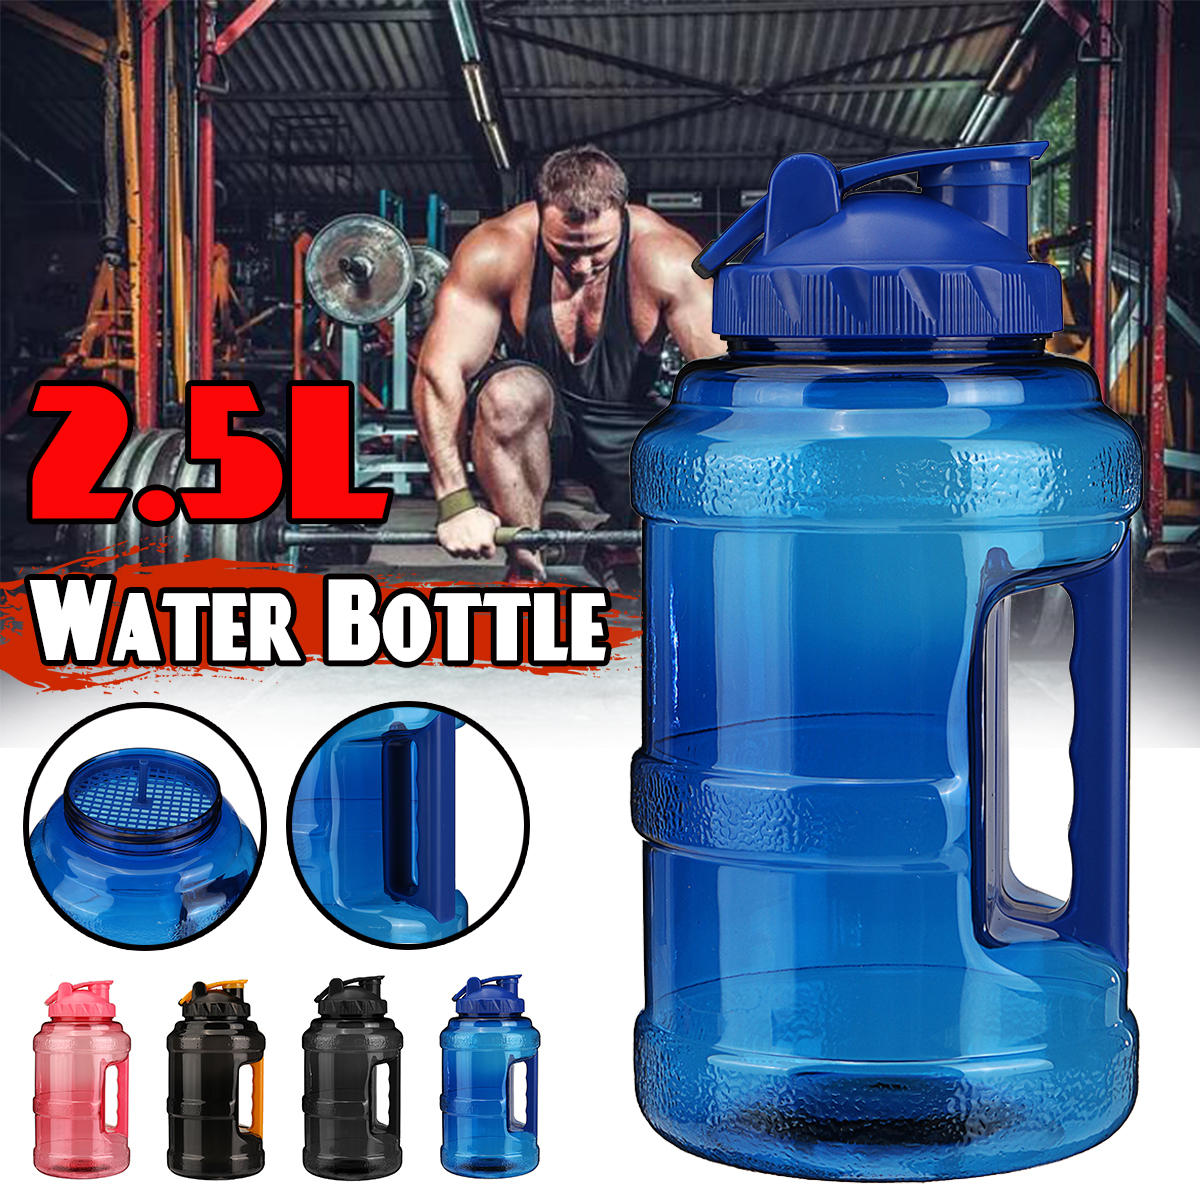 25L-Large-Capacity-Sports-Water-Bottle-with-Handle-PET-Portable-Bucket-Cup-Outdoor-Sports-Fitness-Cu-1898505-1